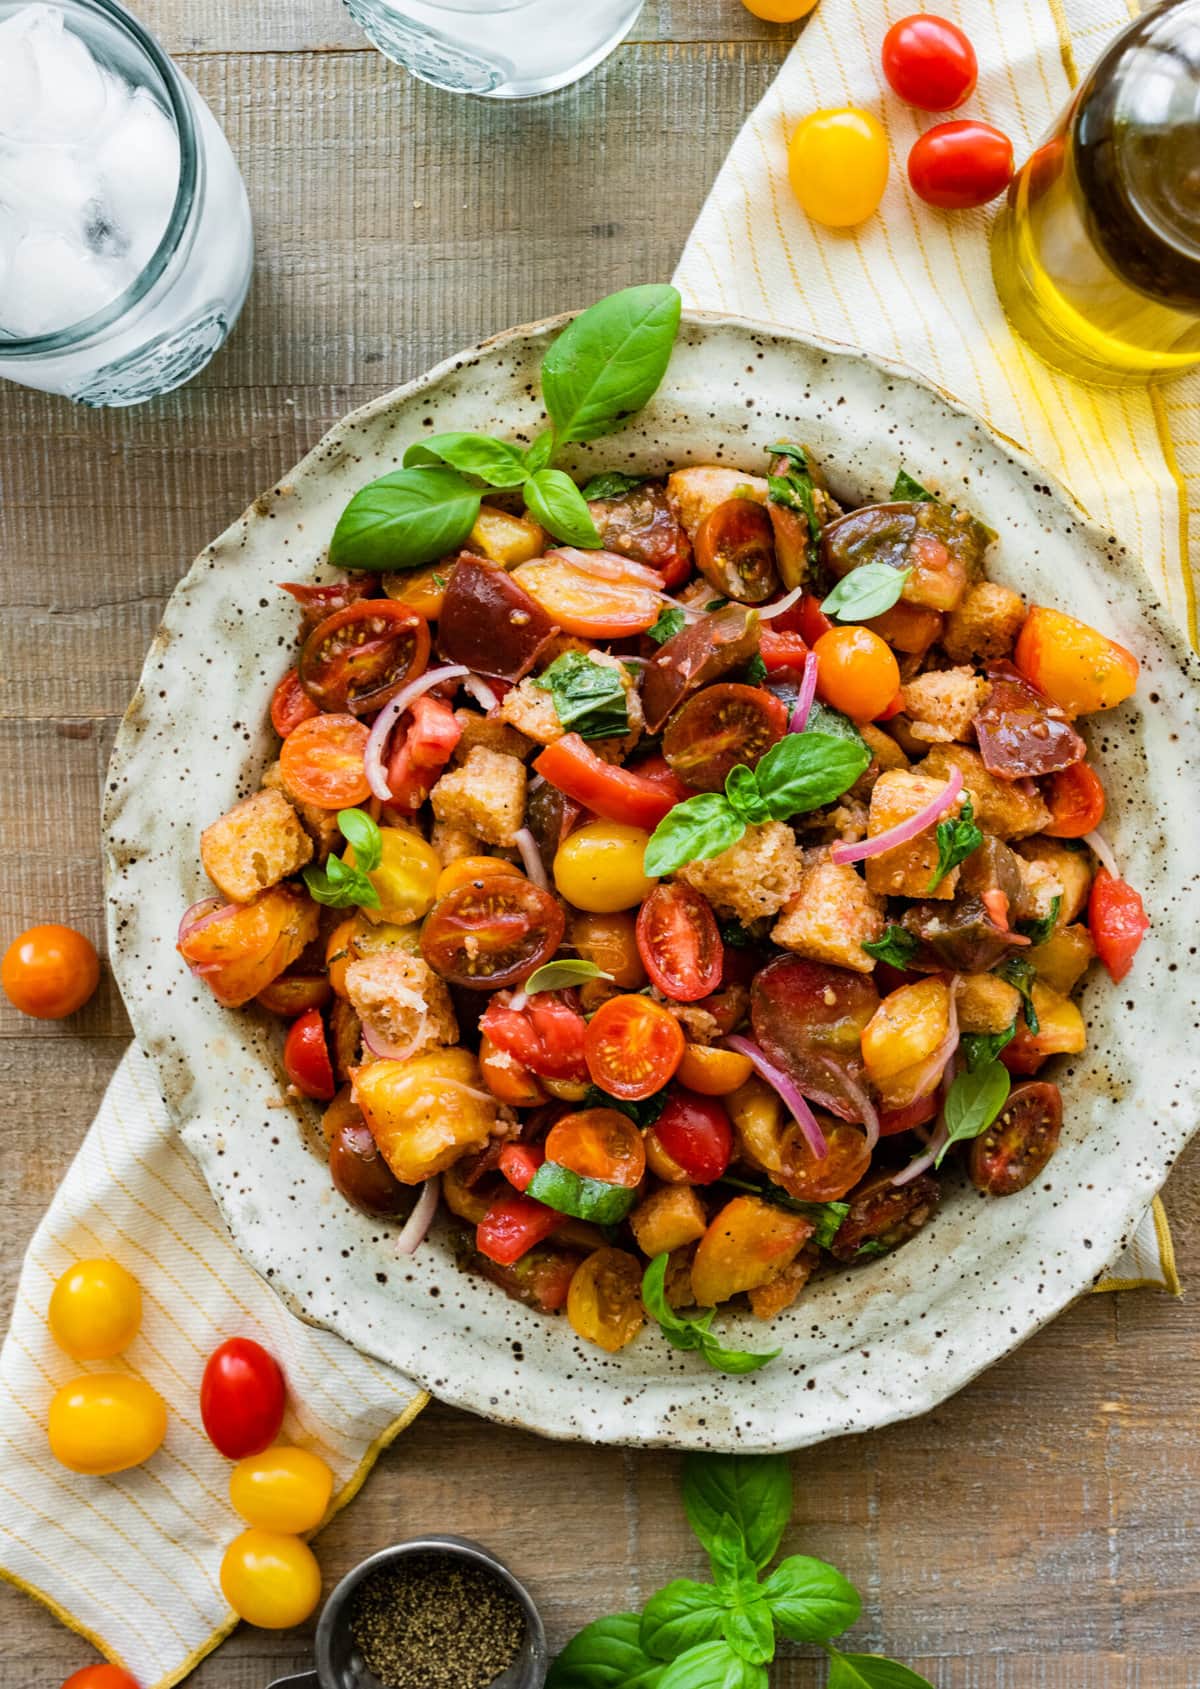 Panzanella salad in a white serving platter with basil as decoration and tomatoes on the side of the plate.